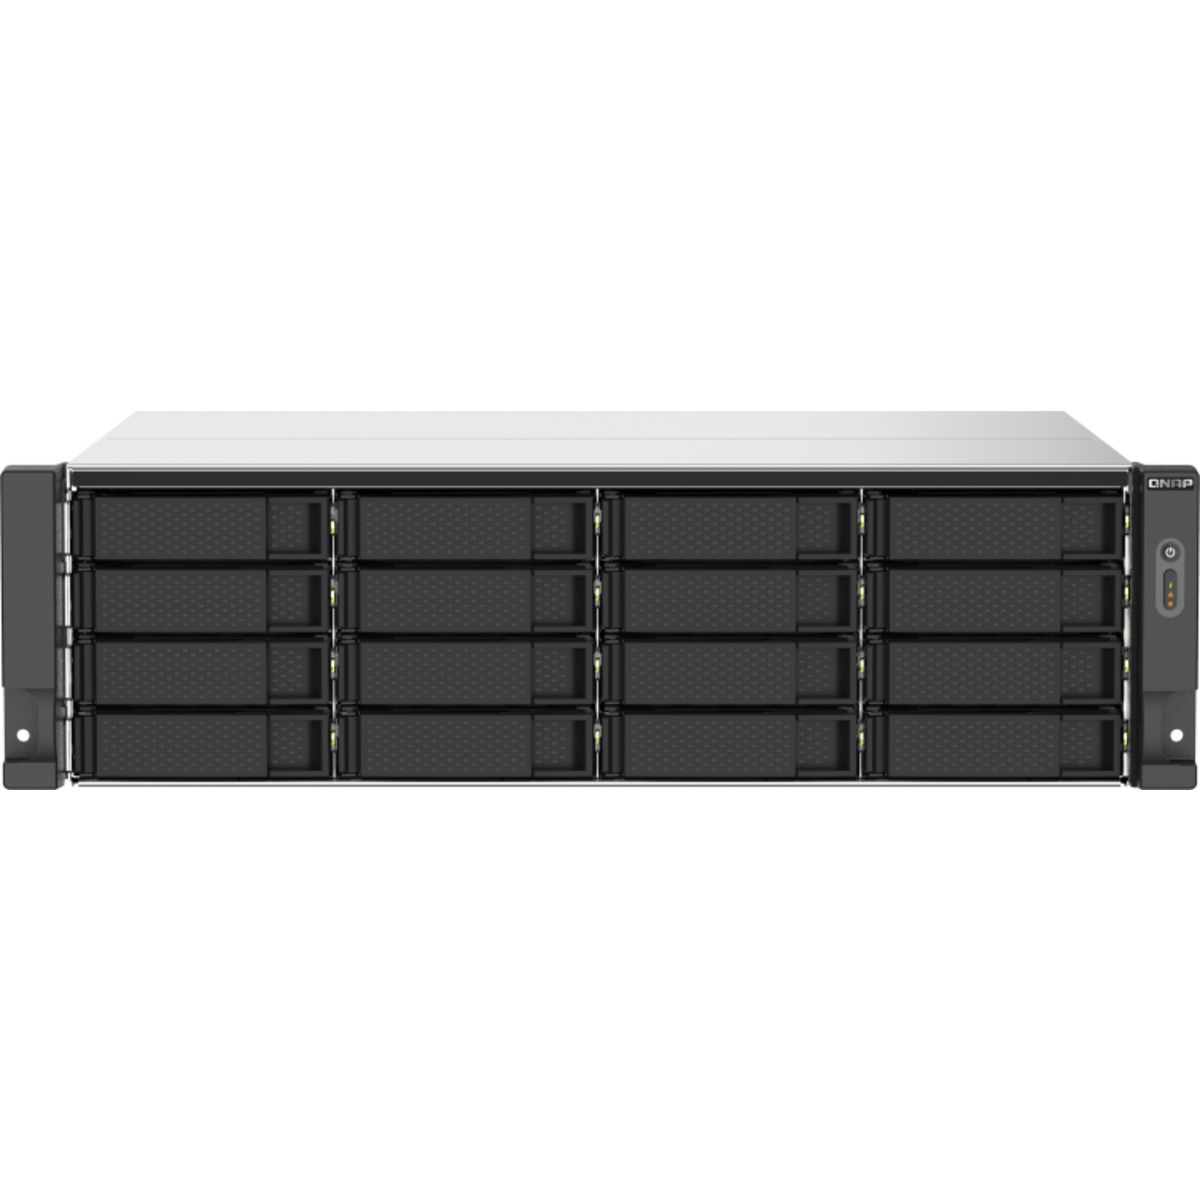 QNAP TS-1673AU-RP 150tb 16-Bay RackMount Multimedia / Power User / Business NAS - Network Attached Storage Device 15x10tb Western Digital Red Pro WD102KFBX 3.5 7200rpm SATA 6Gb/s HDD NAS Class Drives Installed - Burn-In Tested - FREE RAM UPGRADE TS-1673AU-RP